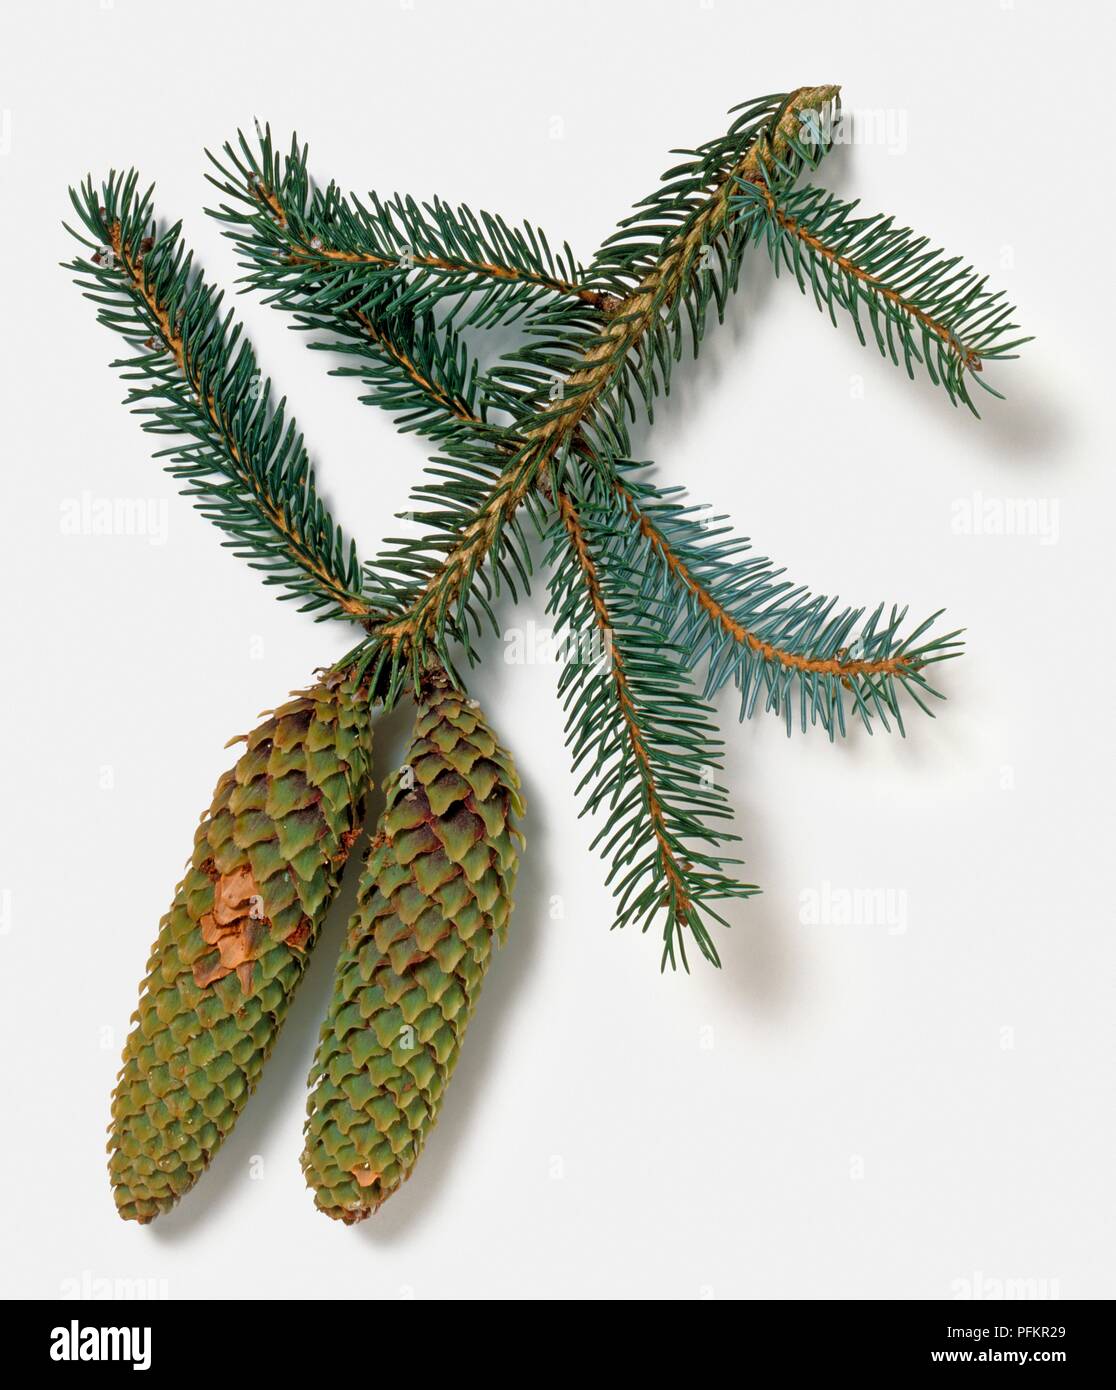 Picea likiangensis (Lijiang spruce), branch with leaves and cones Stock Photo